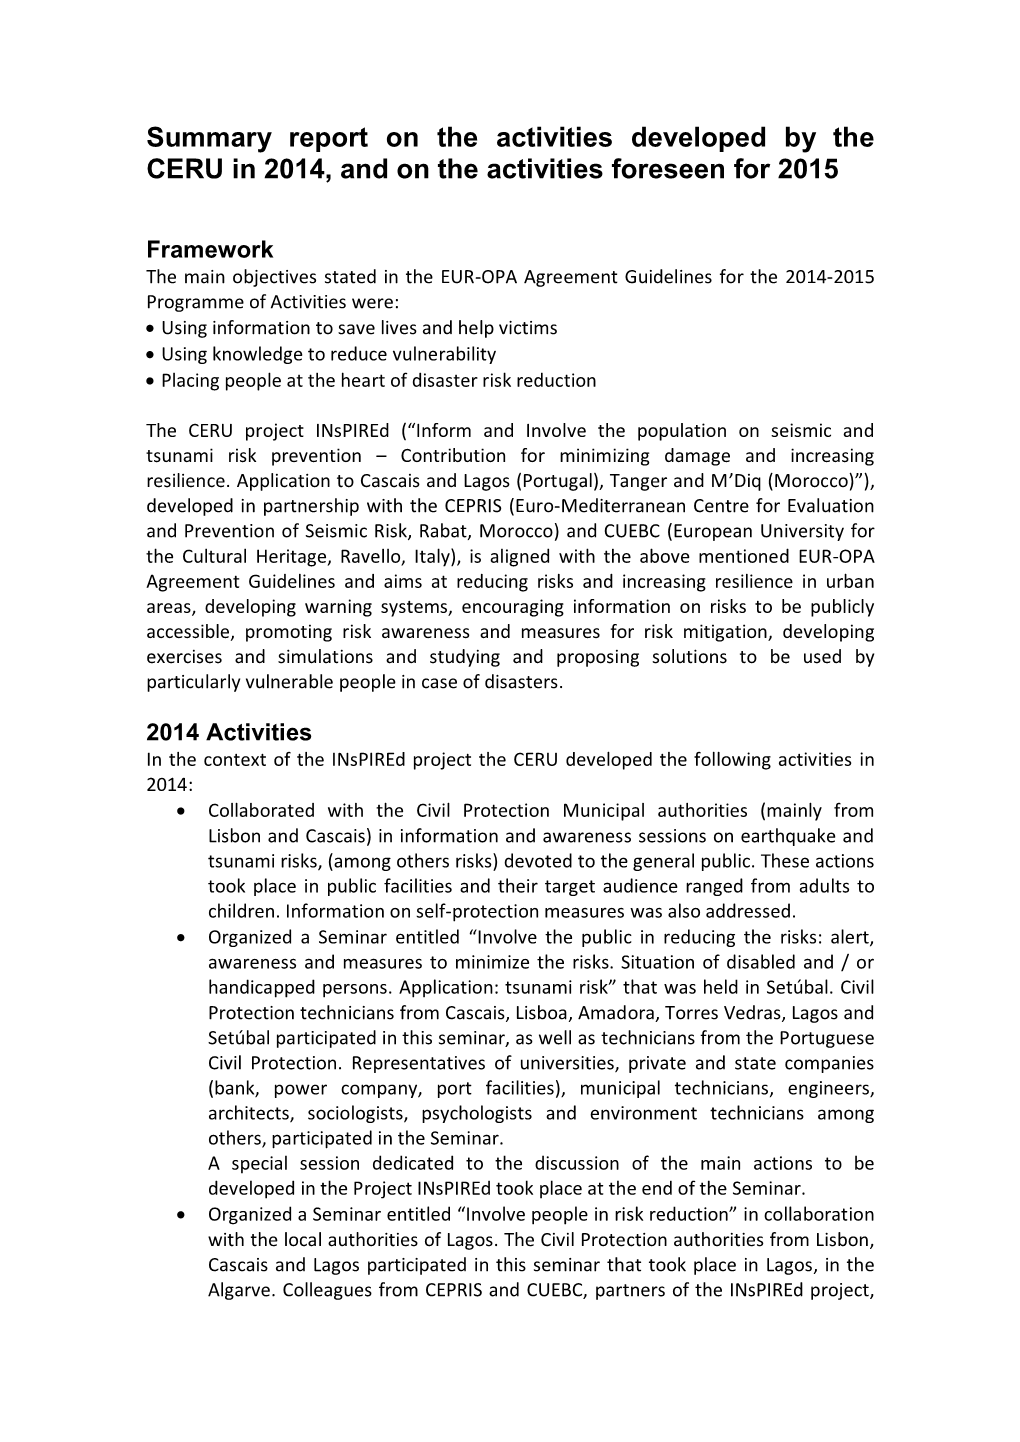 Summary Report on the Activities Developed by the CERU in 2014, and on the Activities Foreseen for 2015